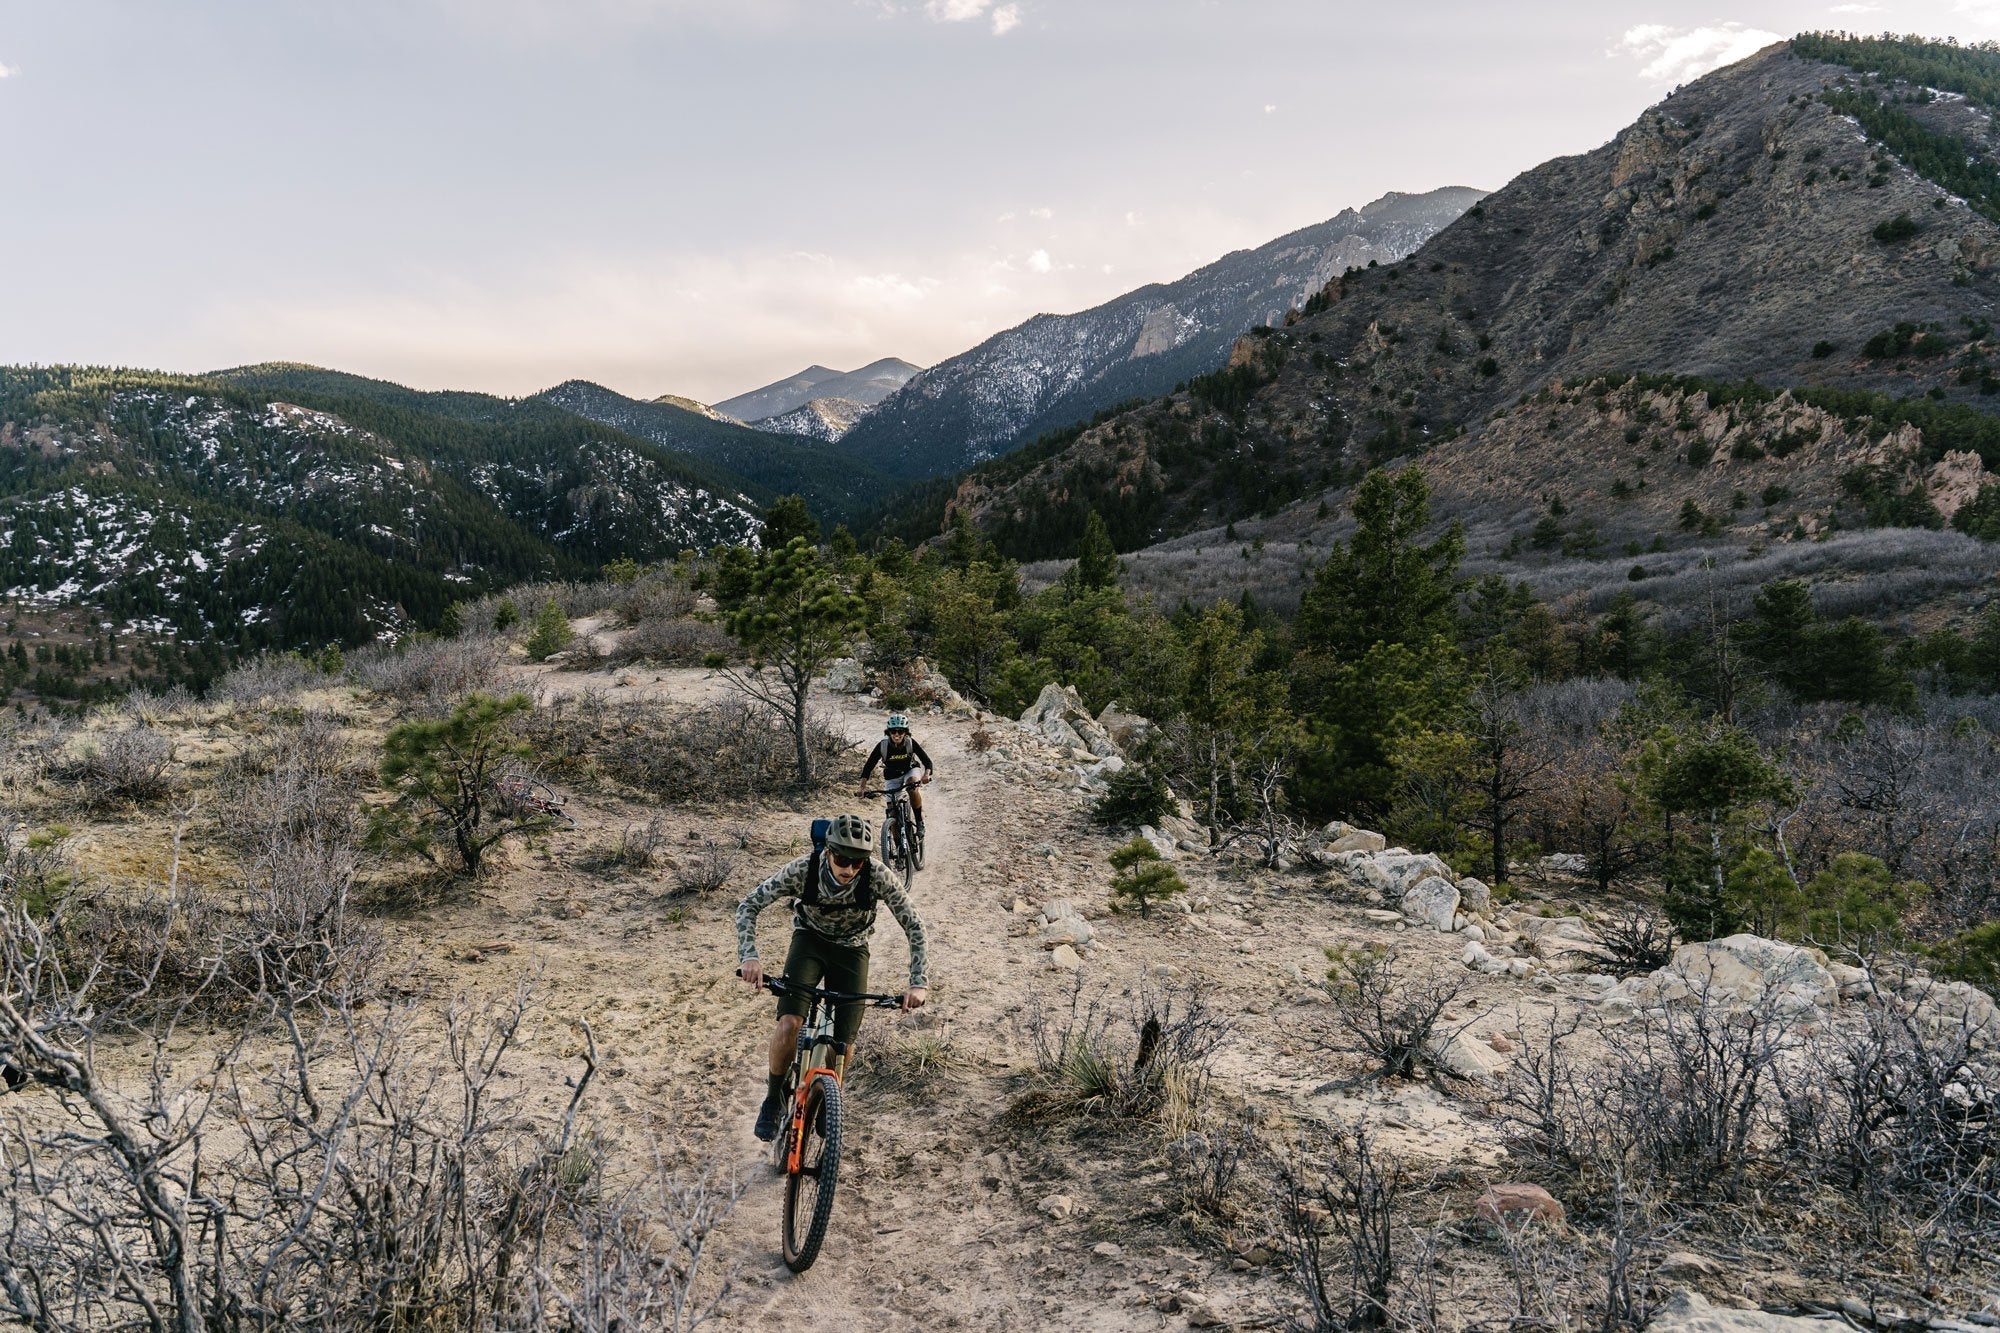 <h1>Made for where you ride</h1><i>From the local trails, to a remote piece of trail highup in a remote mountain range; we wanted to create a series of wheels tailored for your Trail riding.</i>